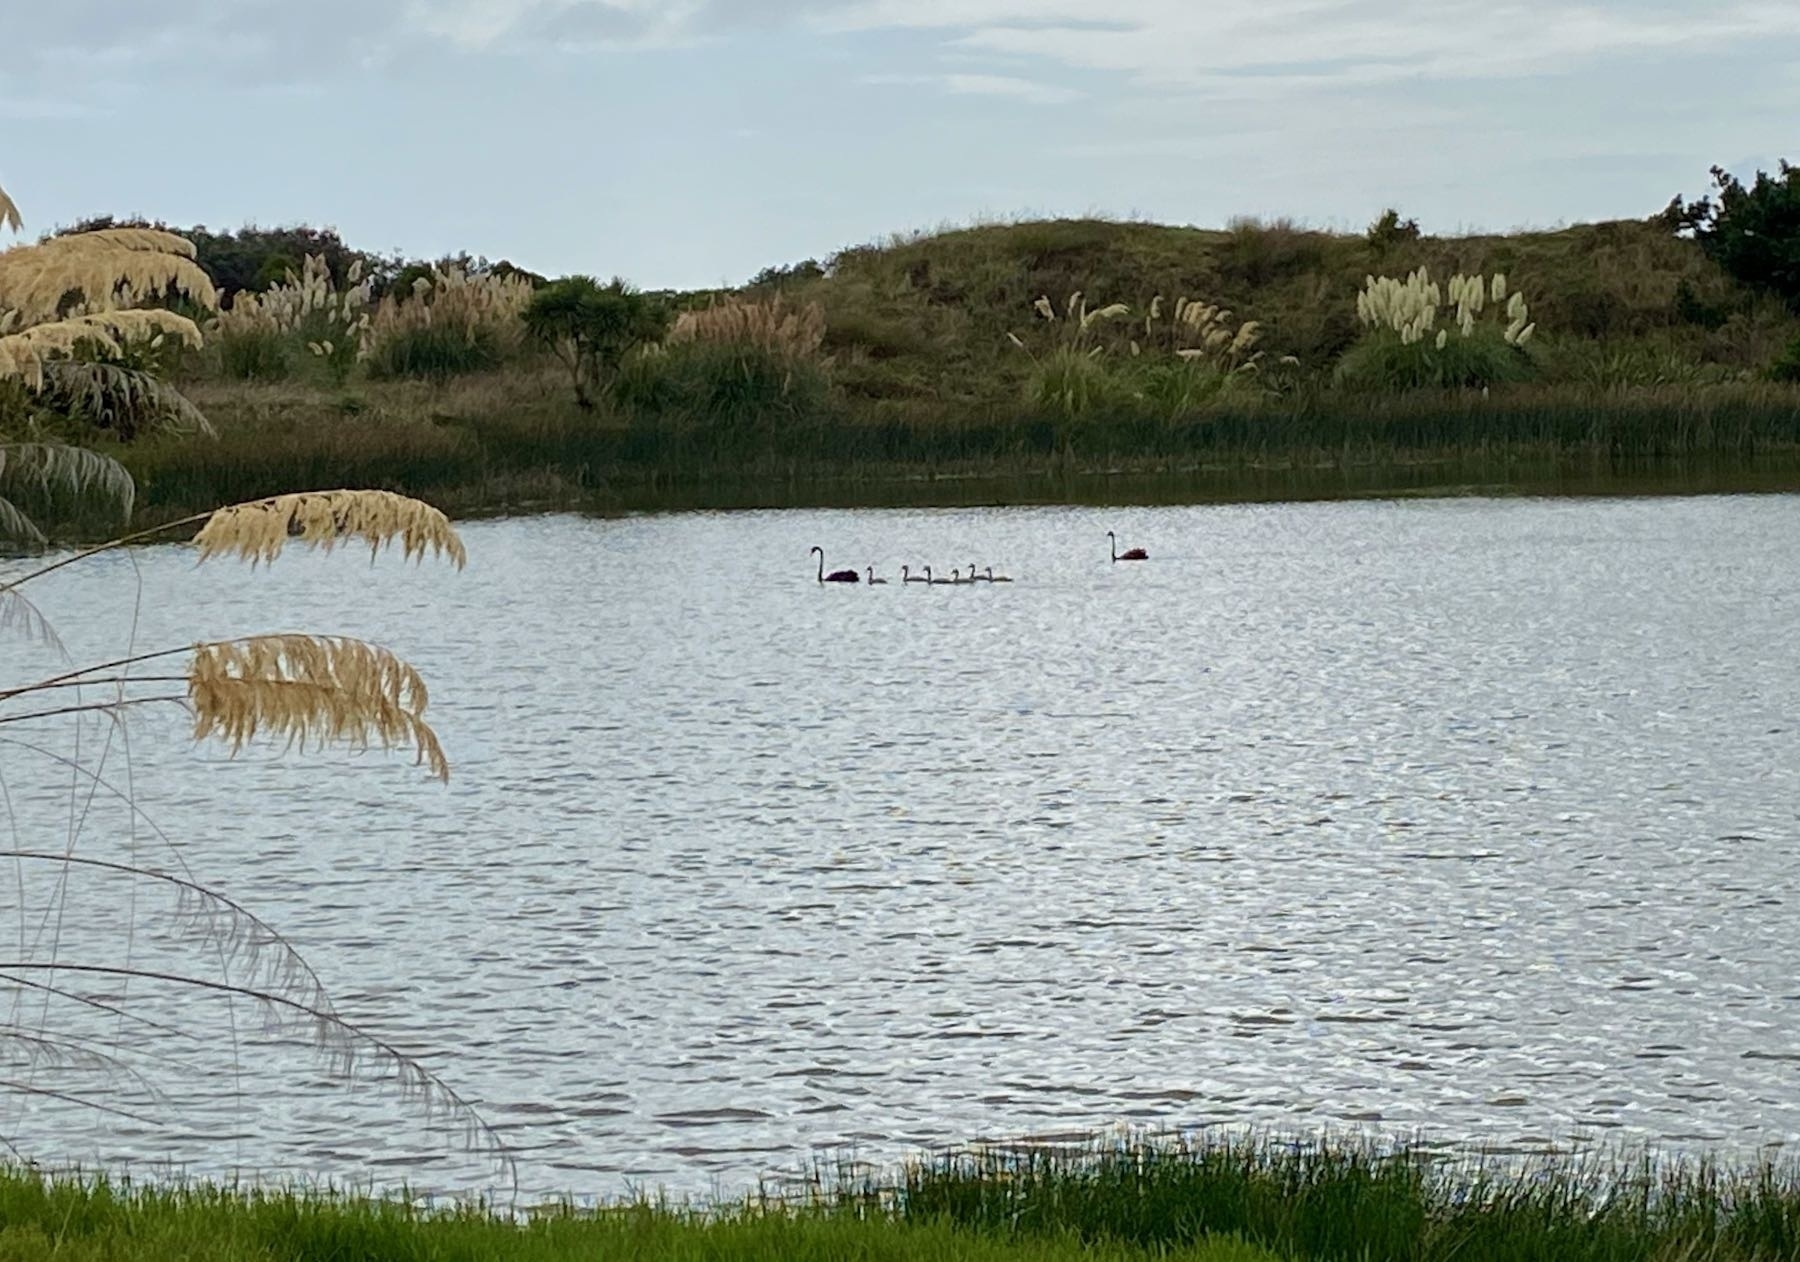 Two black swans and 6 cygnets on the lake. 